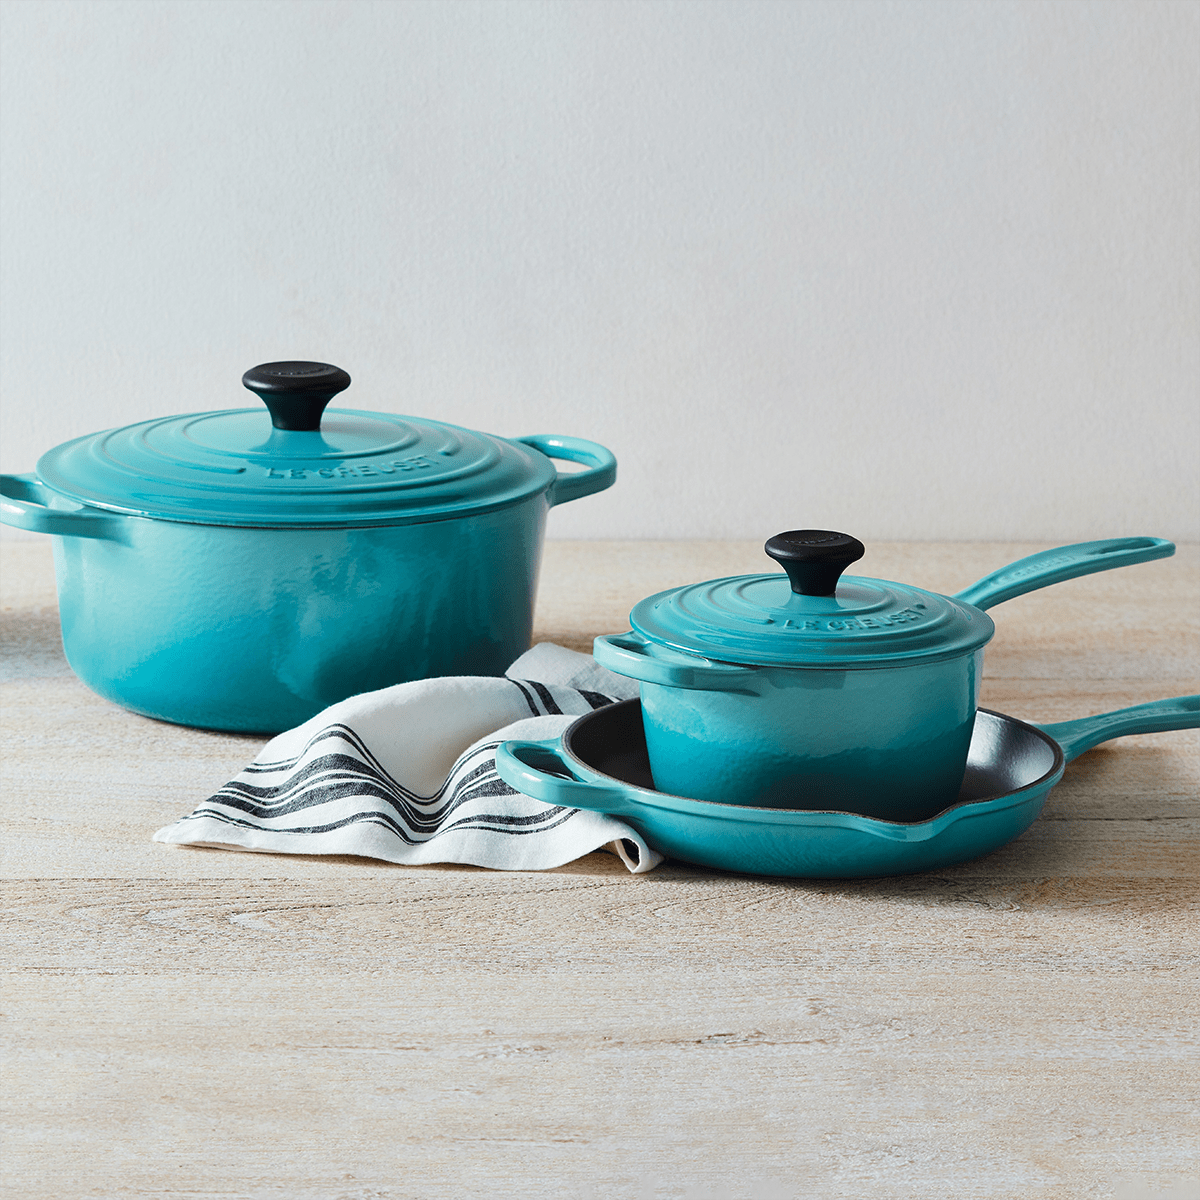 Le Creuset on Instagram: Our enameled cast iron cookware is easy